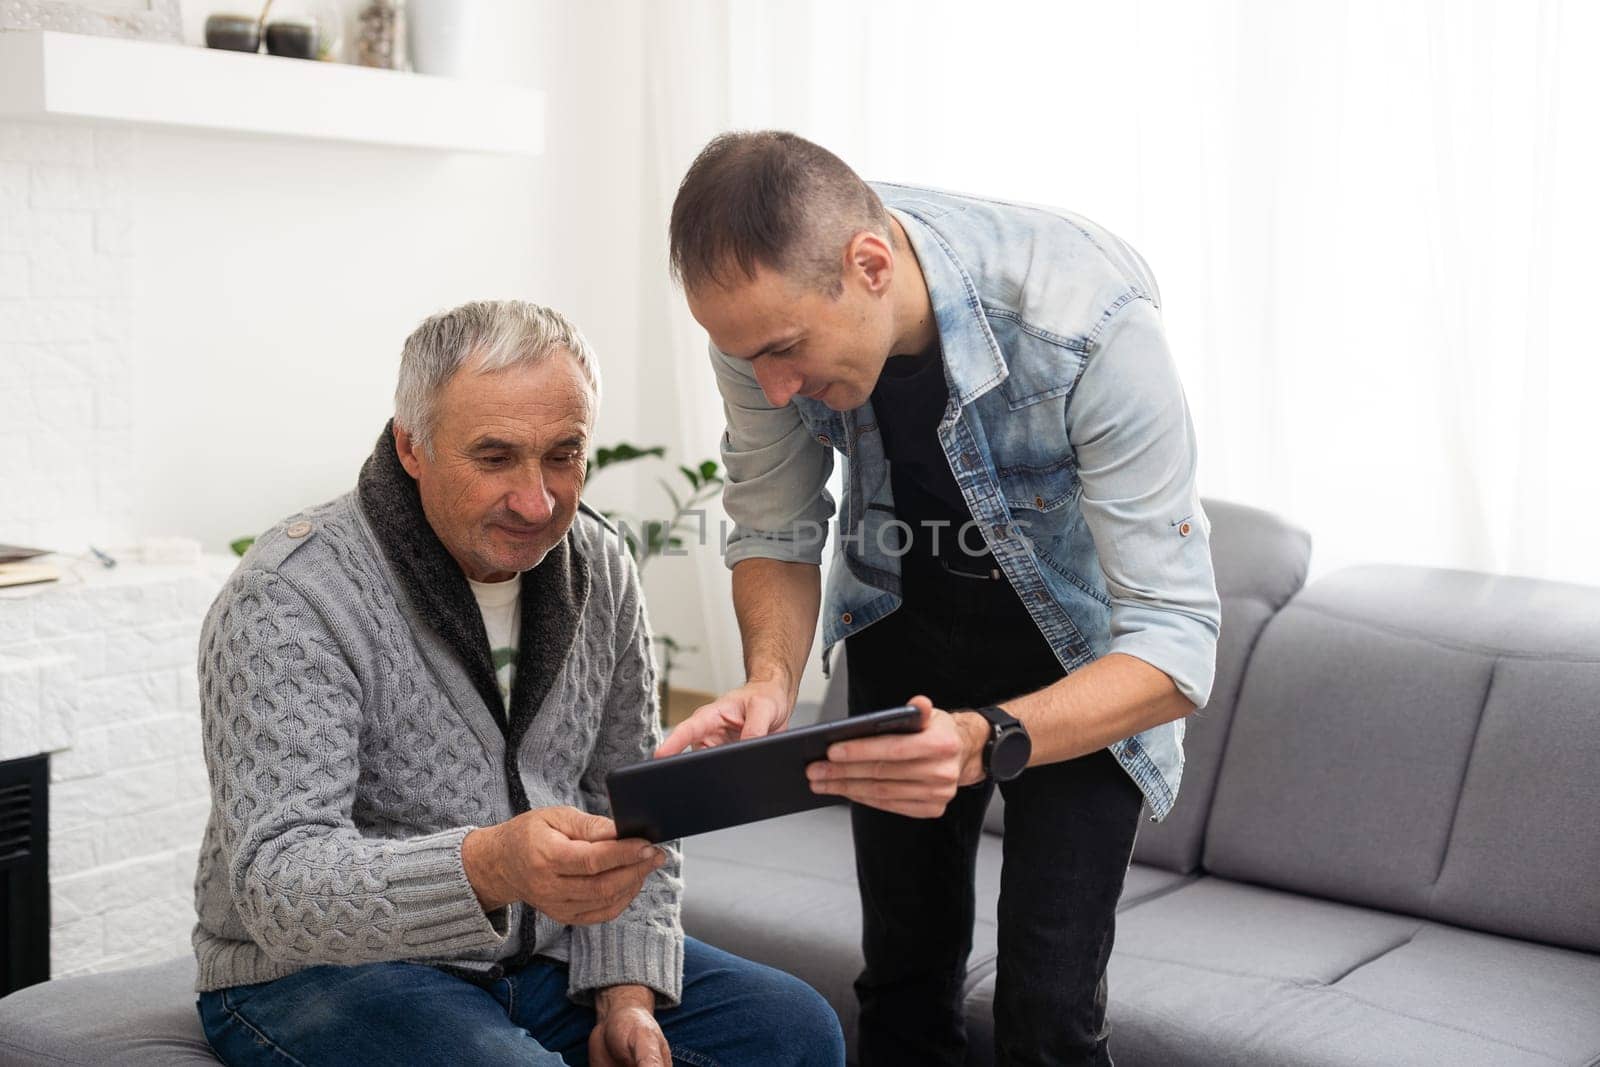 Elderly son takes care of ill father by Andelov13